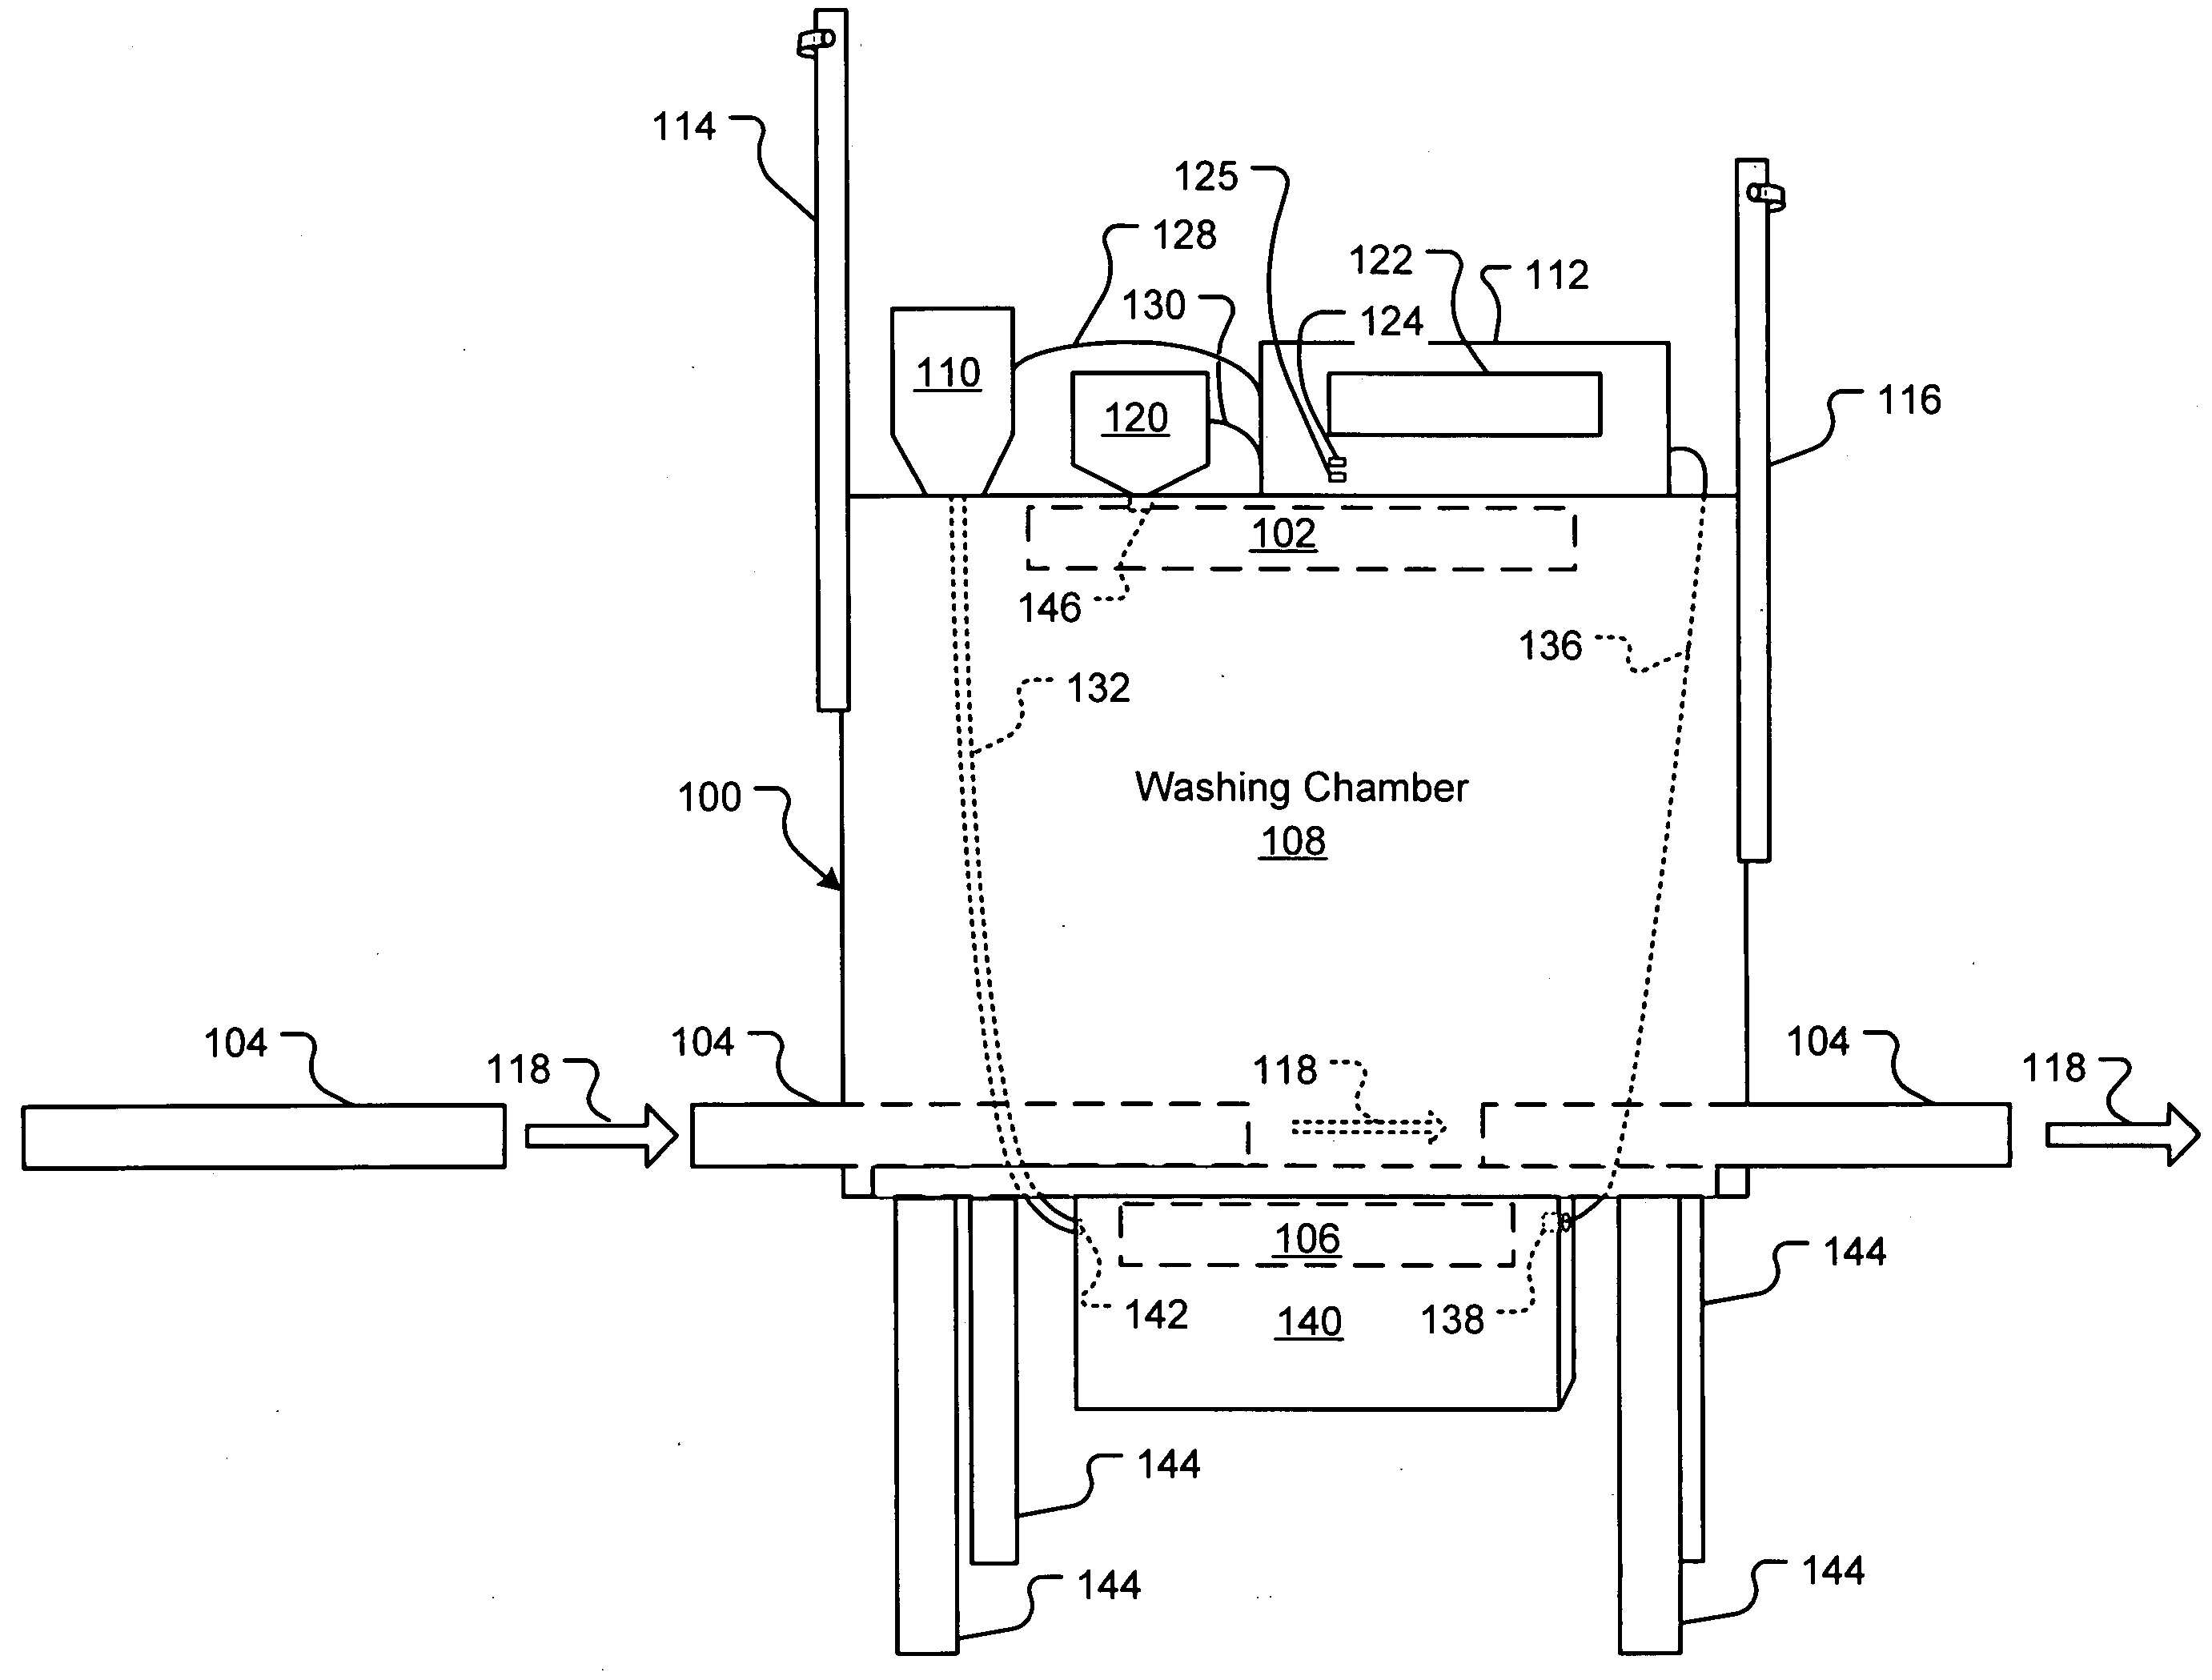 Method and system for installation and control of a utility device